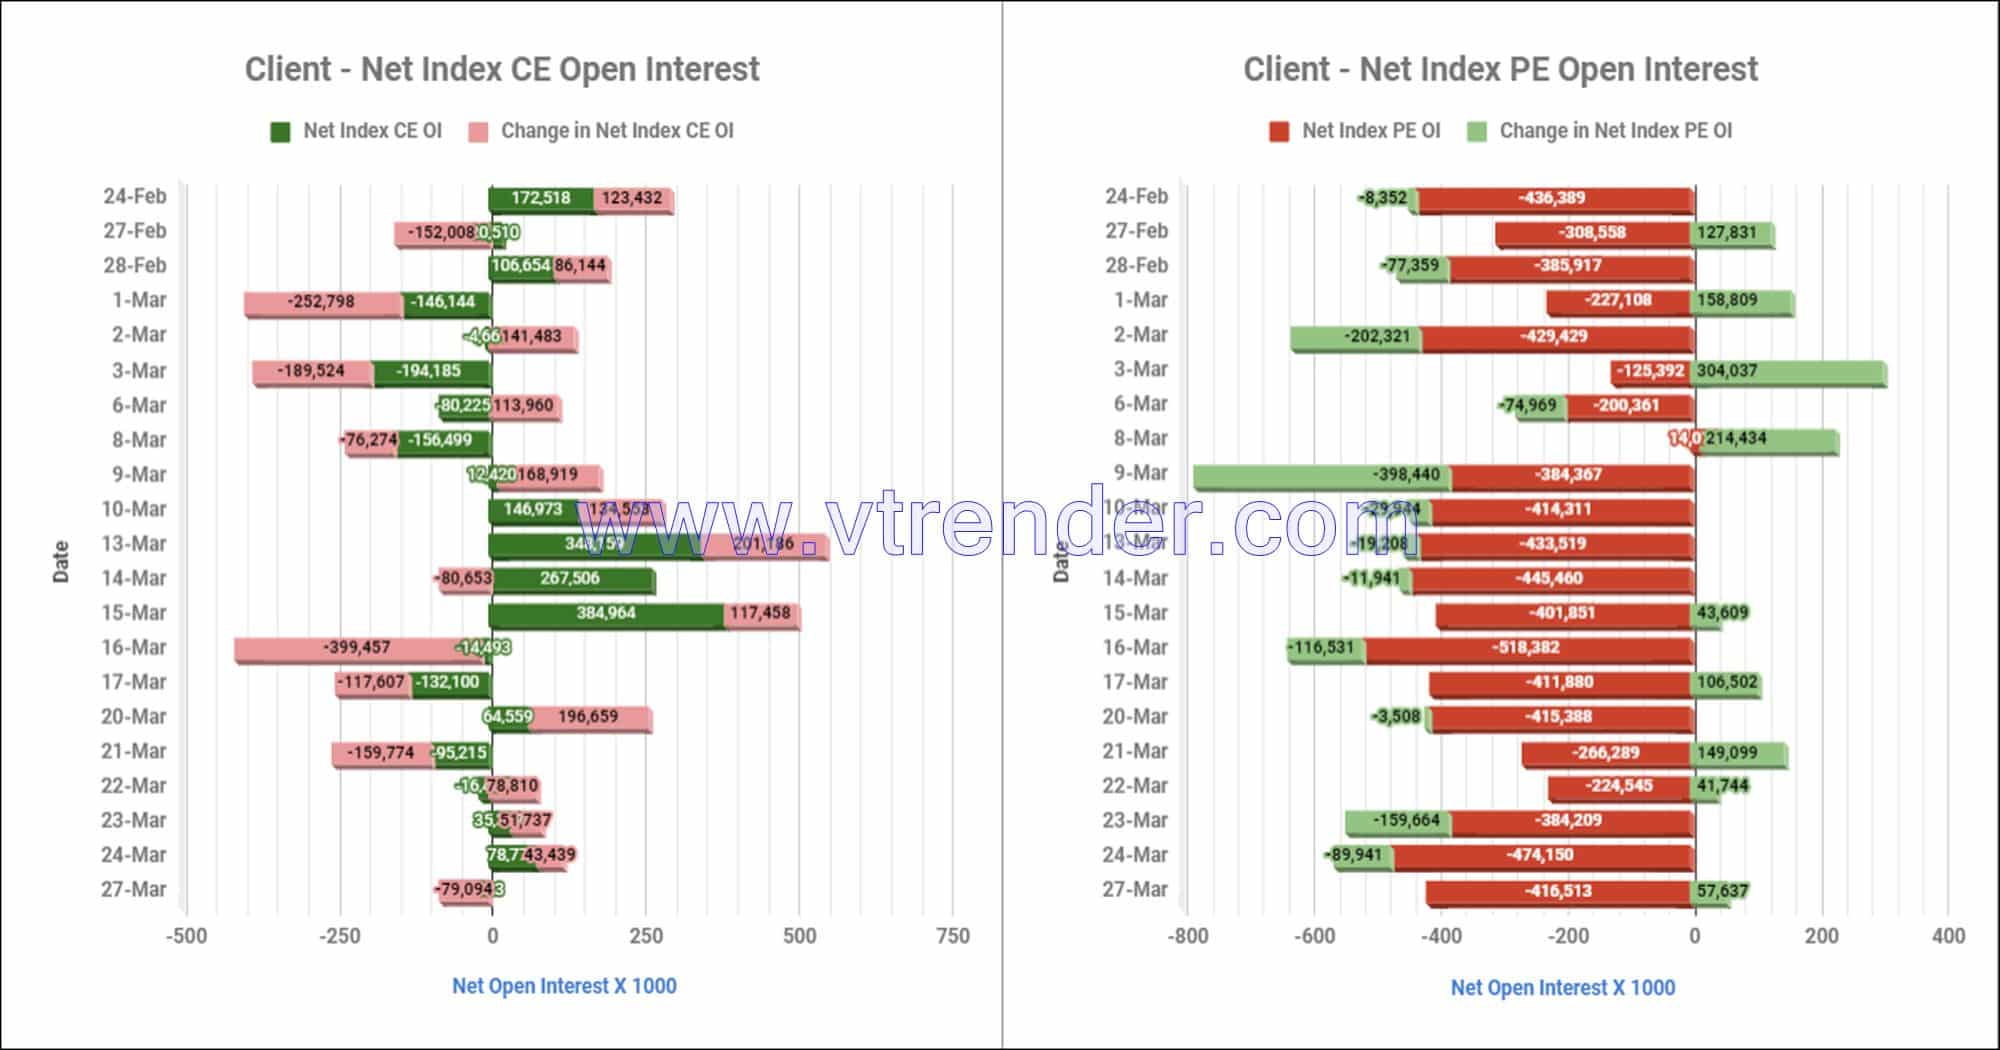 Clientinop27Mar Participantwise Net Open Interest And Net Equity Investments – 27Th Mar 2023 Client, Equity, Fii, Index Futures, Index Options, Open Interest, Prop